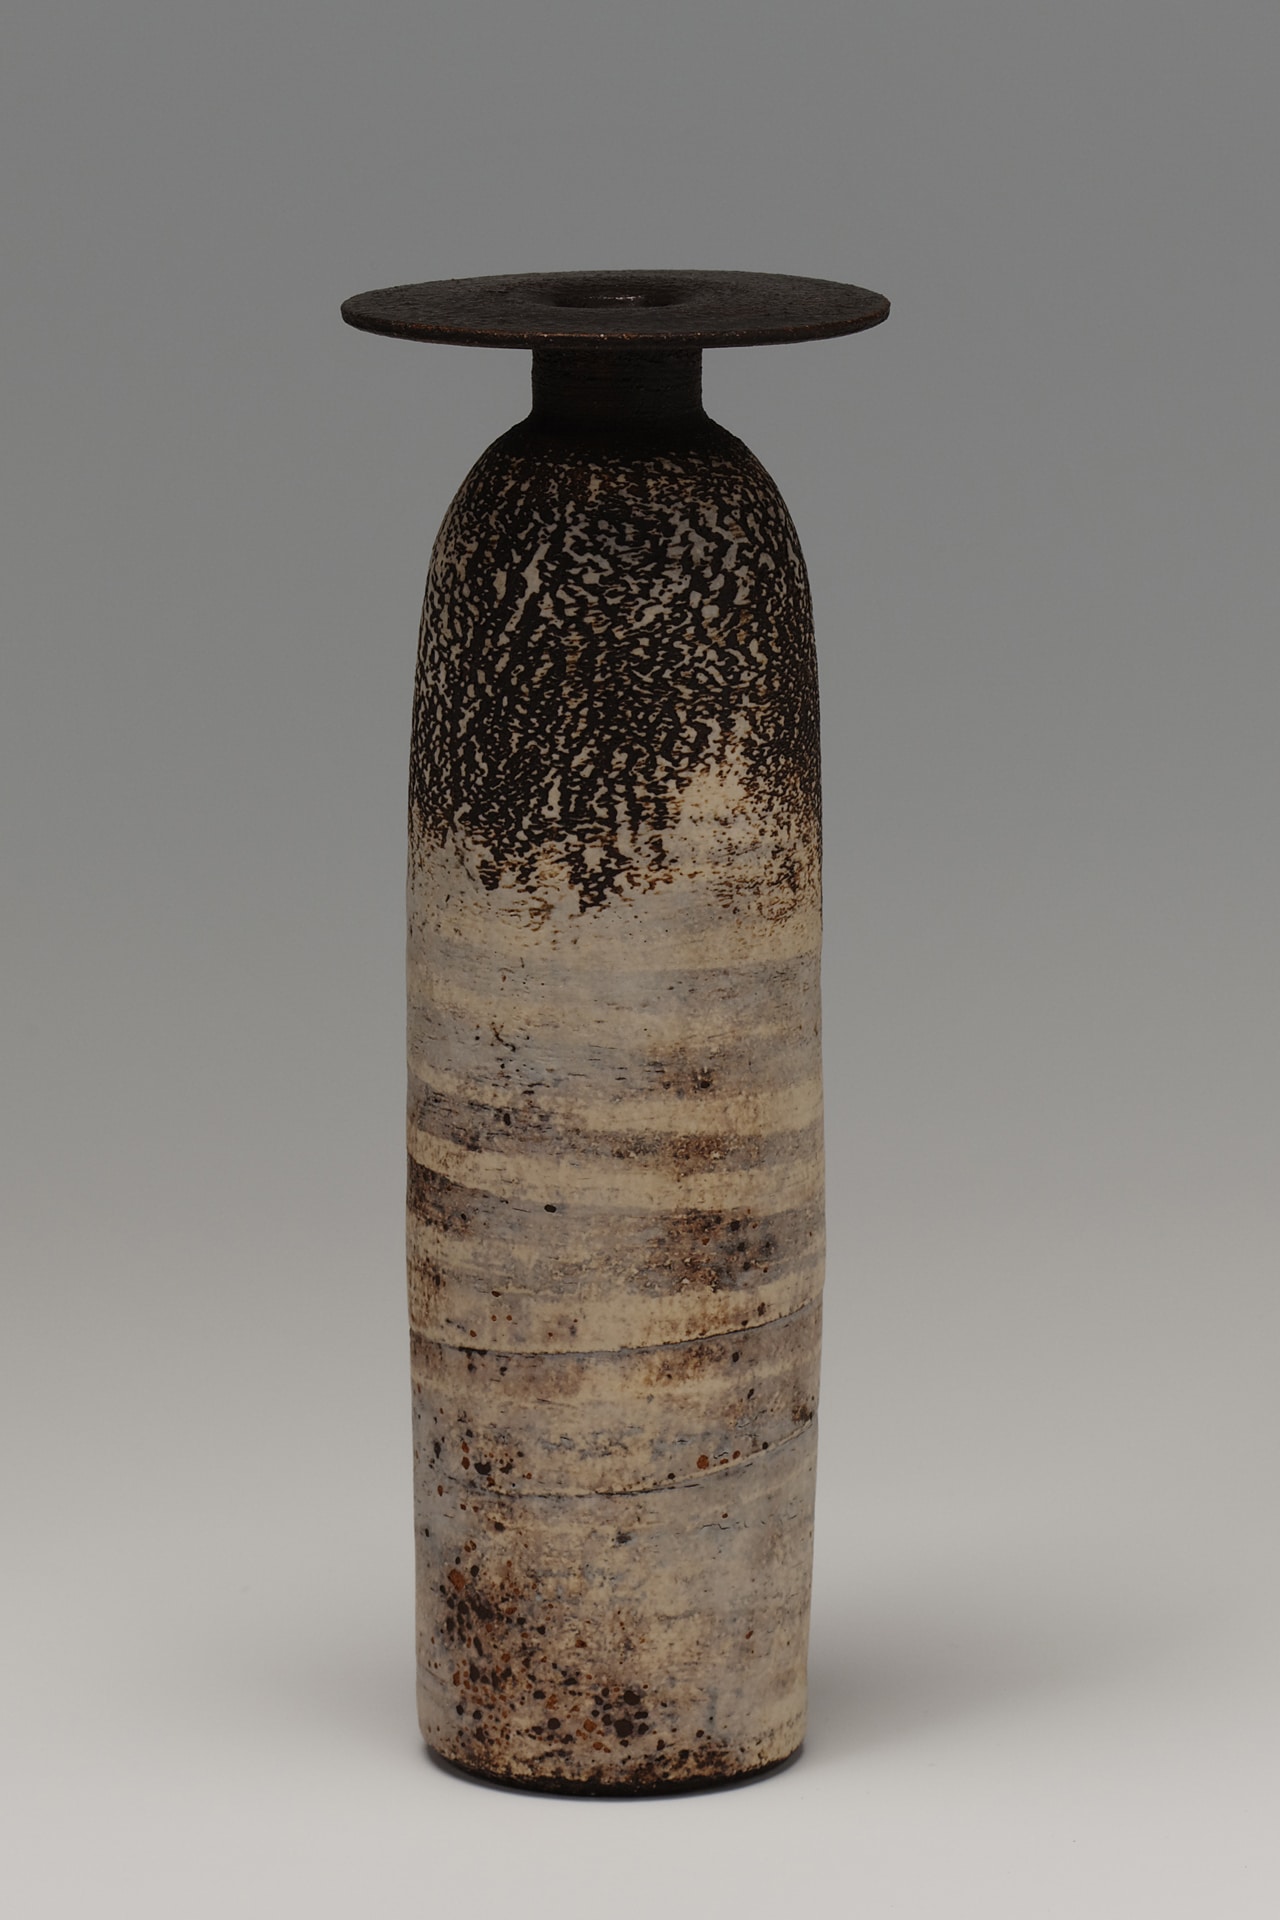 a vessel with a flat mouth and two-toned earth colors